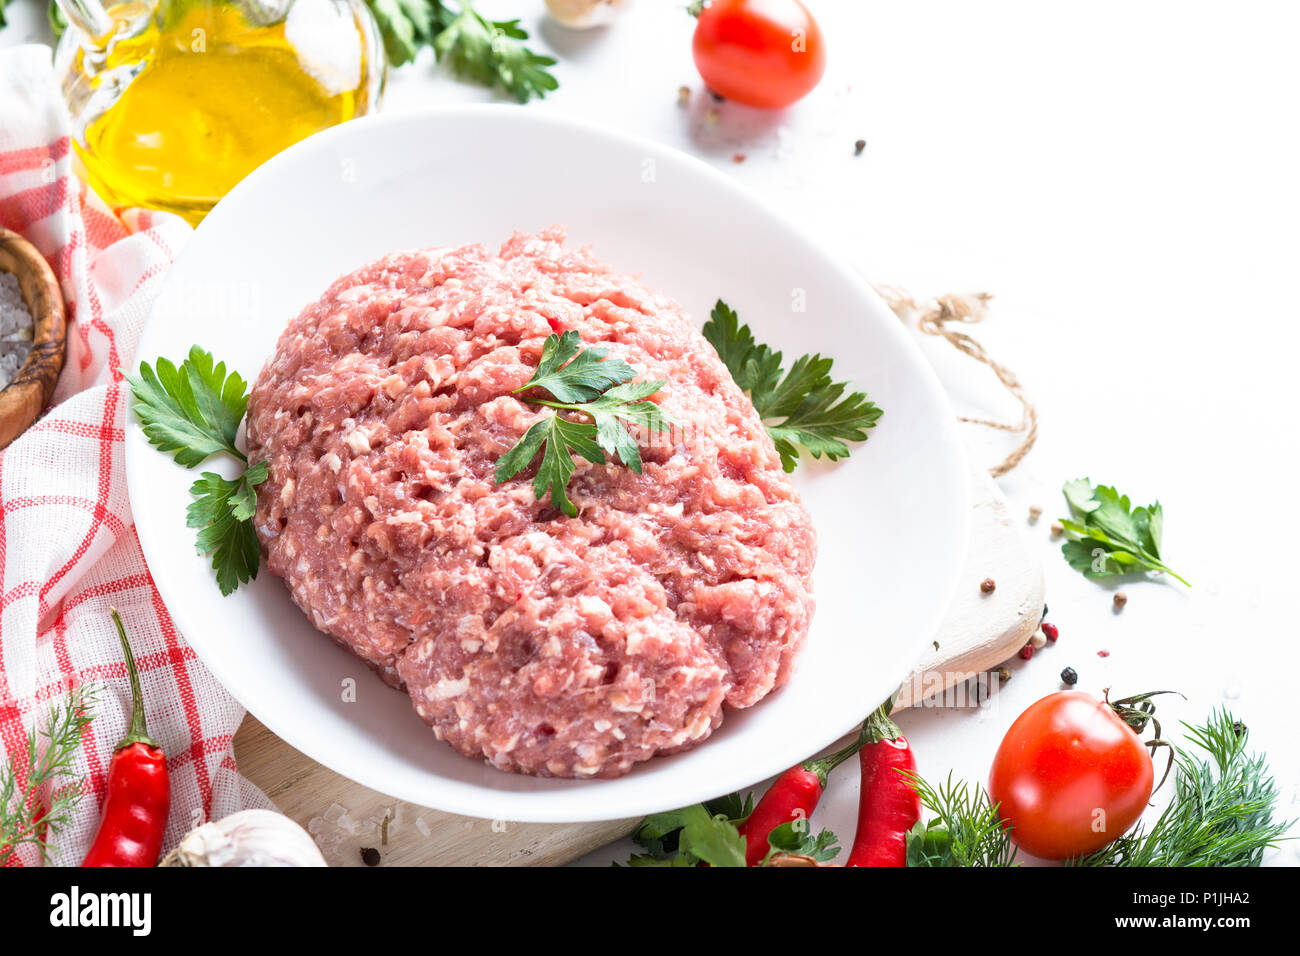 Minced meat with ingredients for cooking on white table. Stock Photo